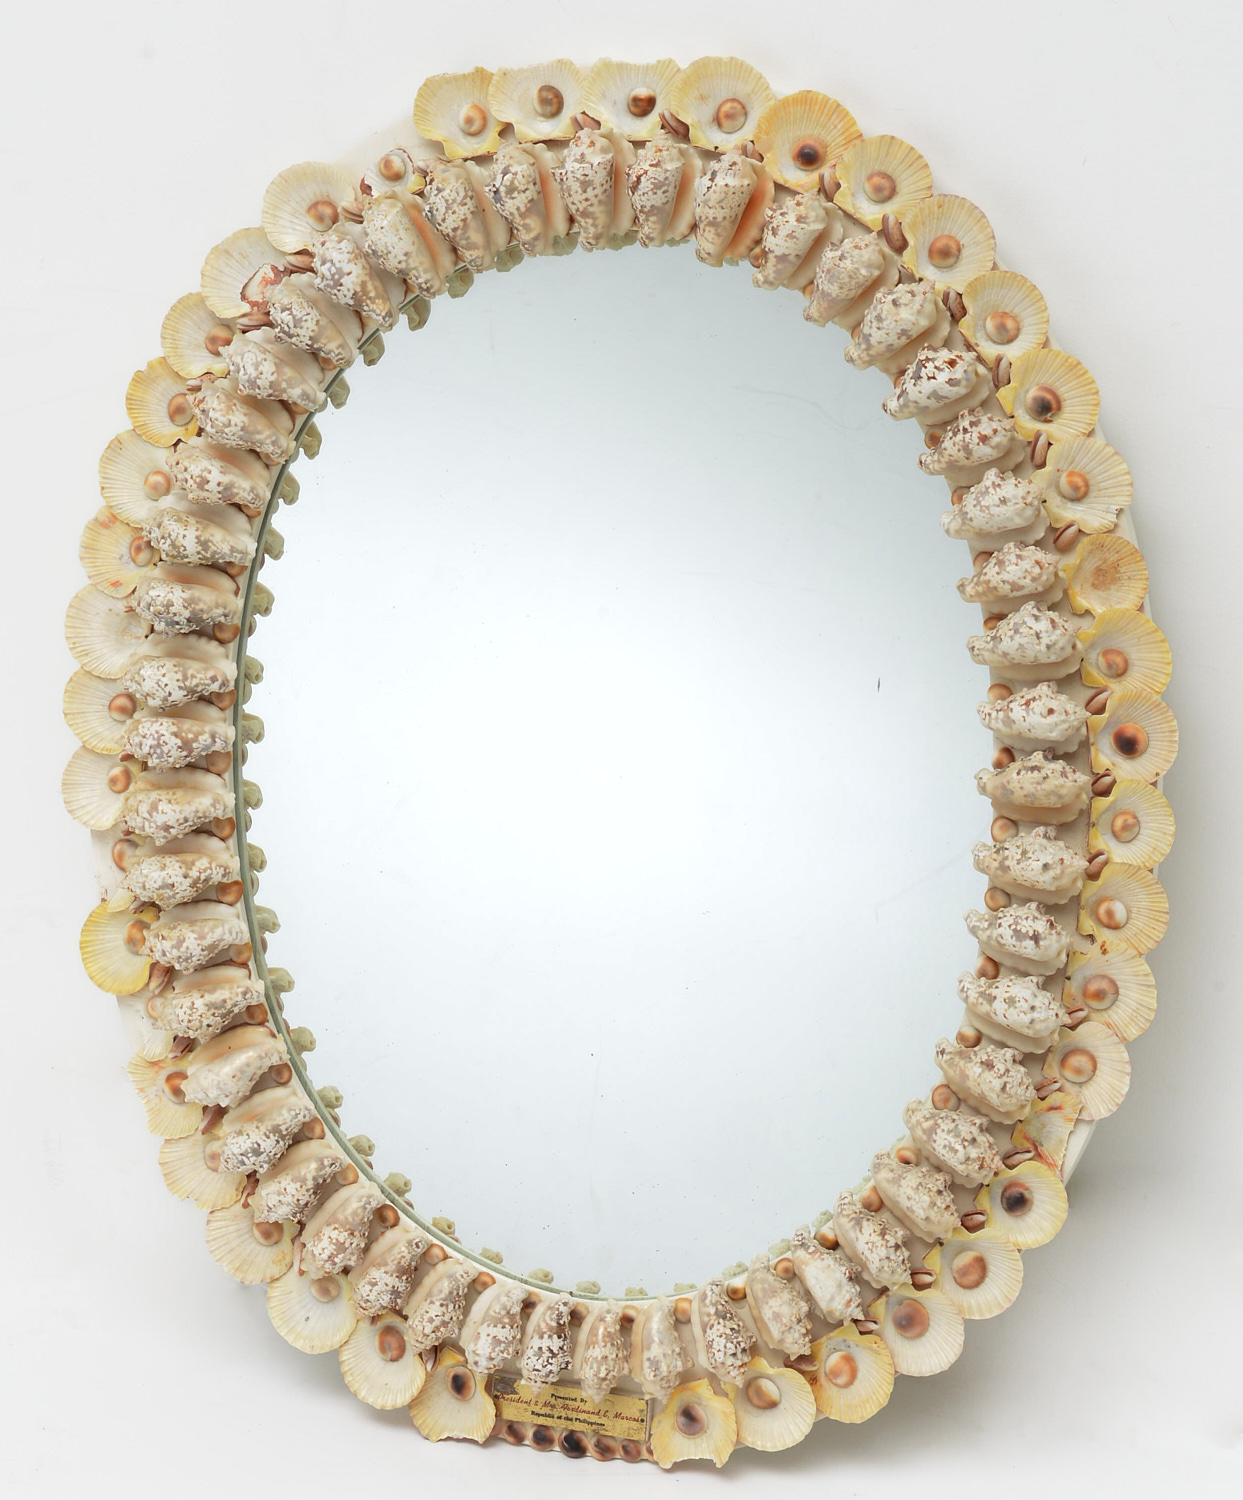 SHELL ENCRUSTED MIRROR, GIFT OF